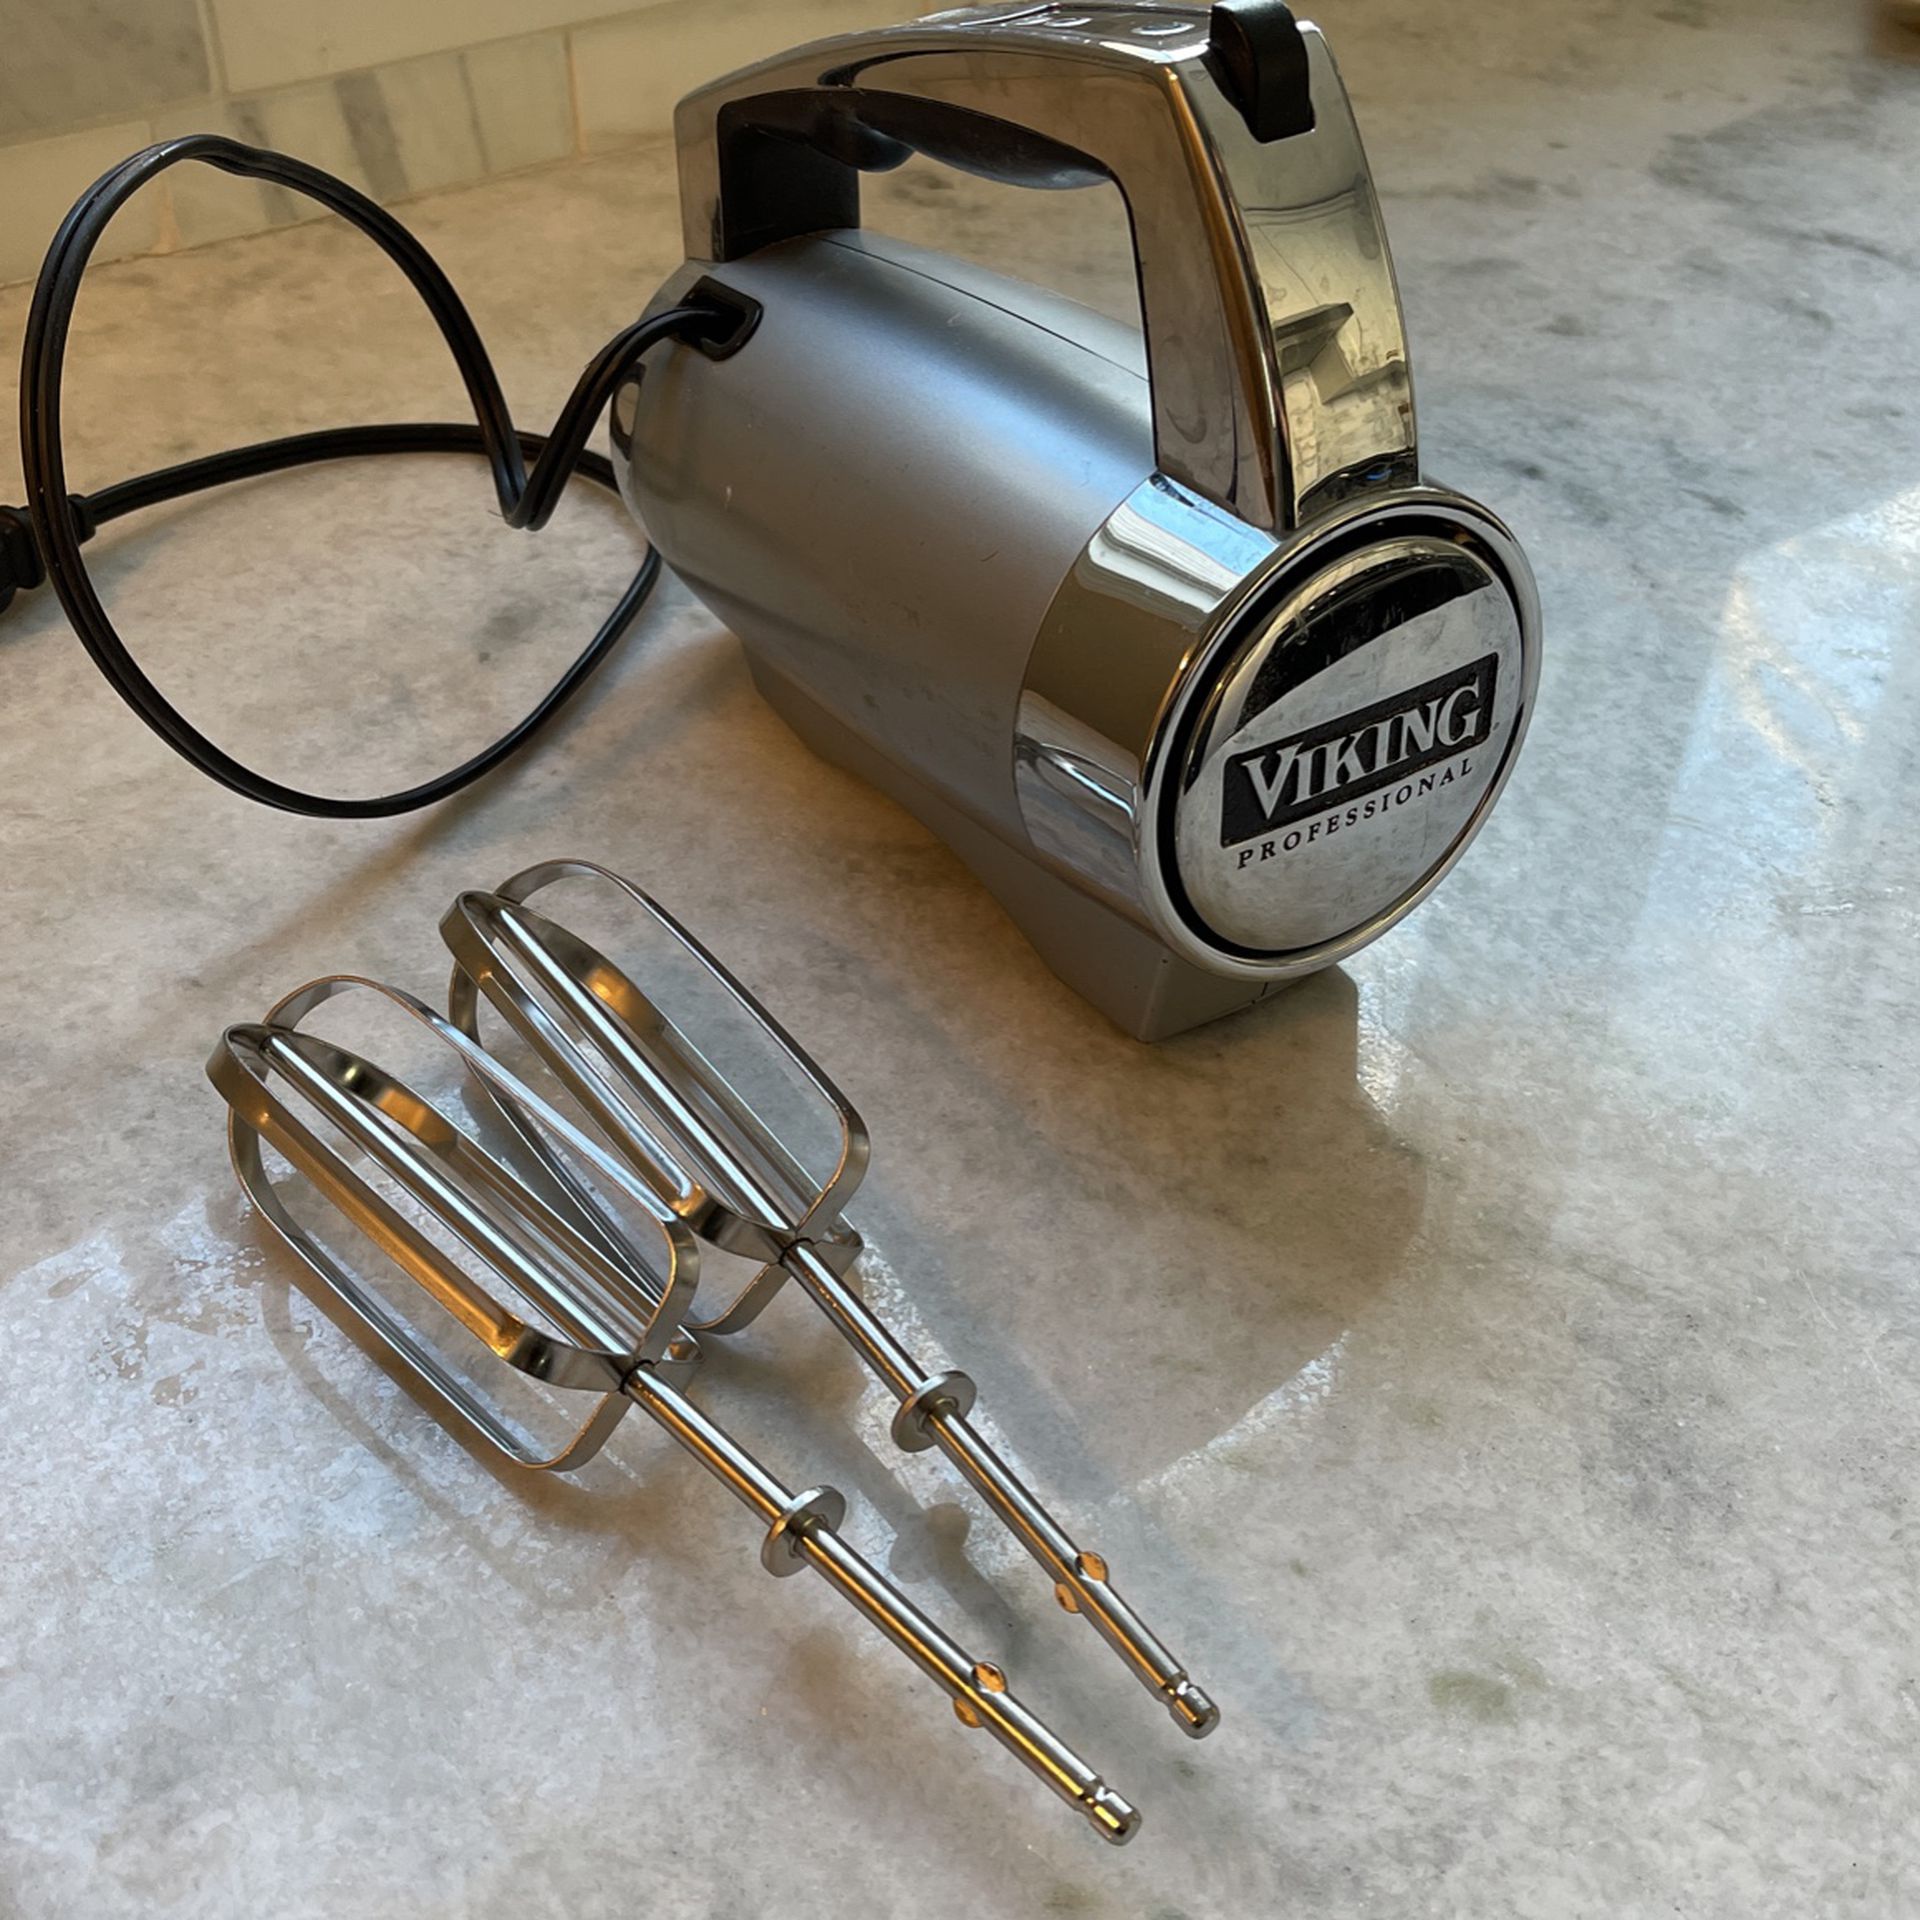 KitchenAid Ultra Power 5-Speed Hand Mixer for Sale in Queens, NY - OfferUp